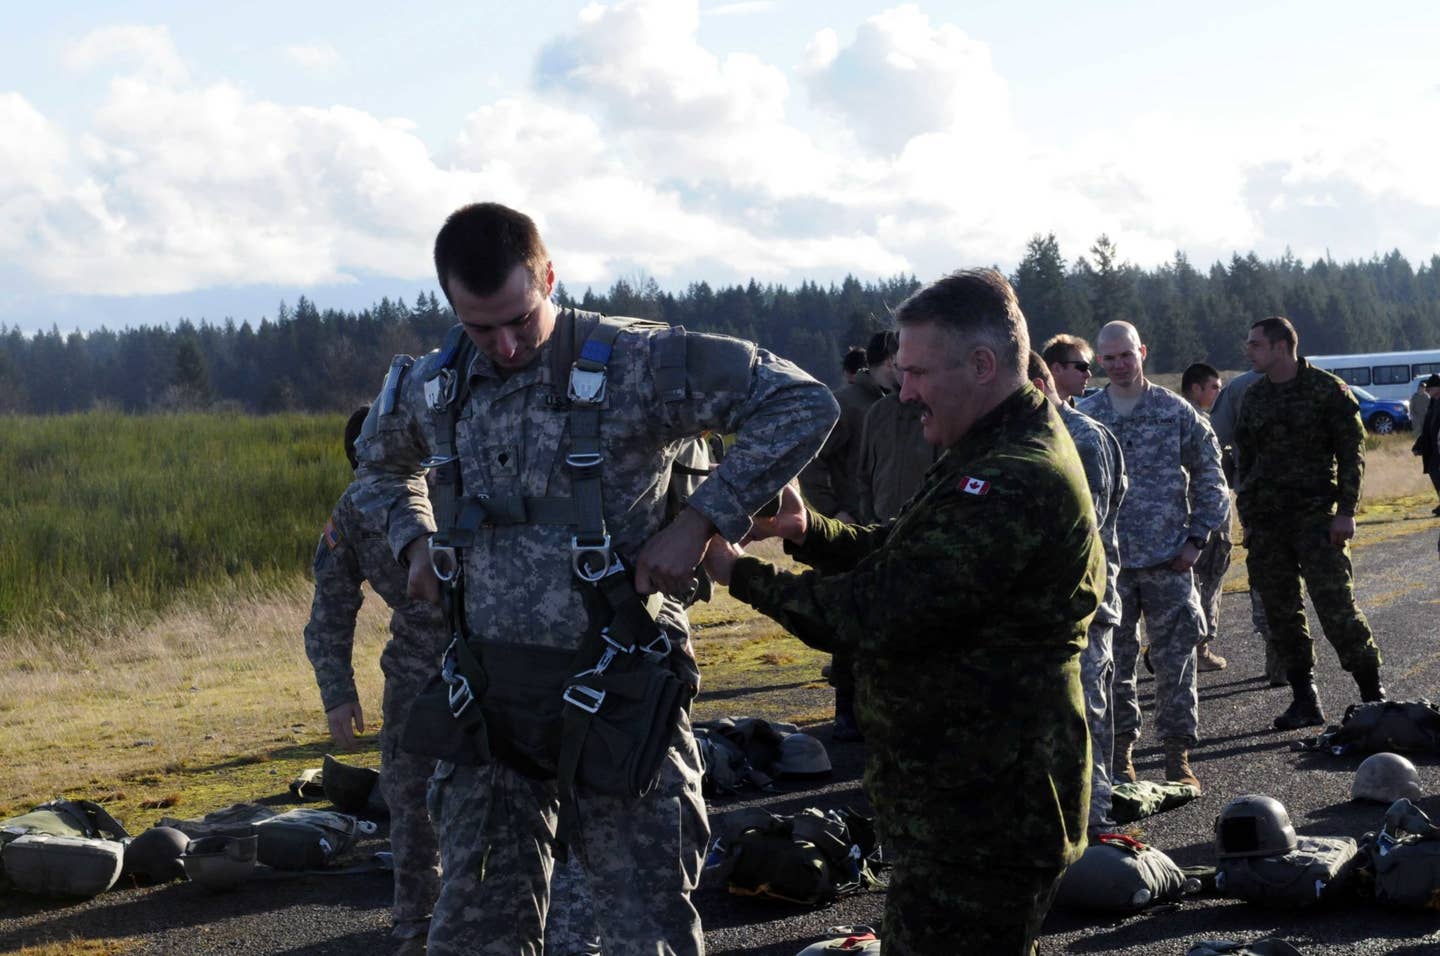 Members of 1st Special Forces Group (Airborne) and the Canadian Special Operations Regiment conducted a combined airborne operation and wing-exchange ceremony at Roger's drop zone on Joint Base Lewis-McChord, Wash. (Photo by Sgt. Elayseah Woodard-Hinton, 20th Public Affairs Detachment)